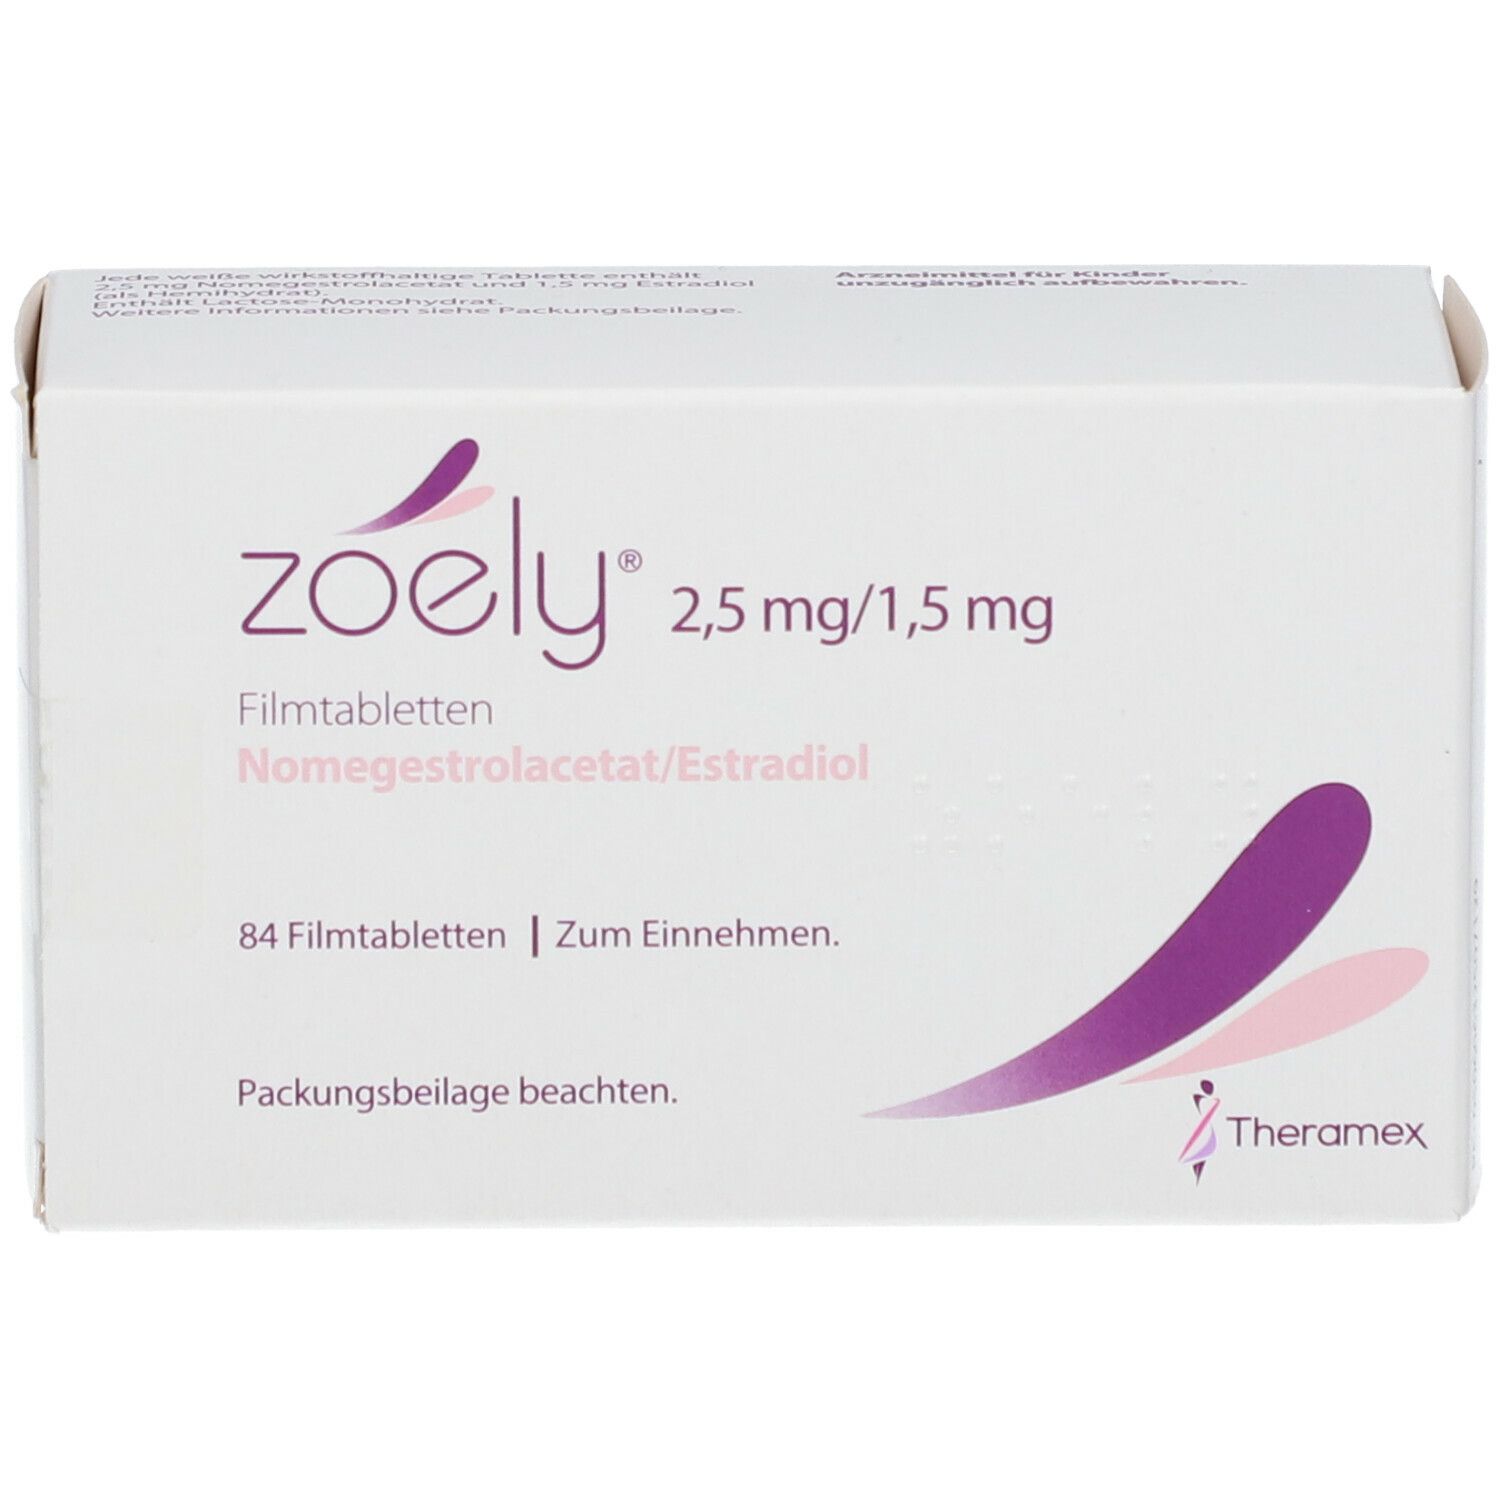 zoely® 2,5 mg/1,5 mg